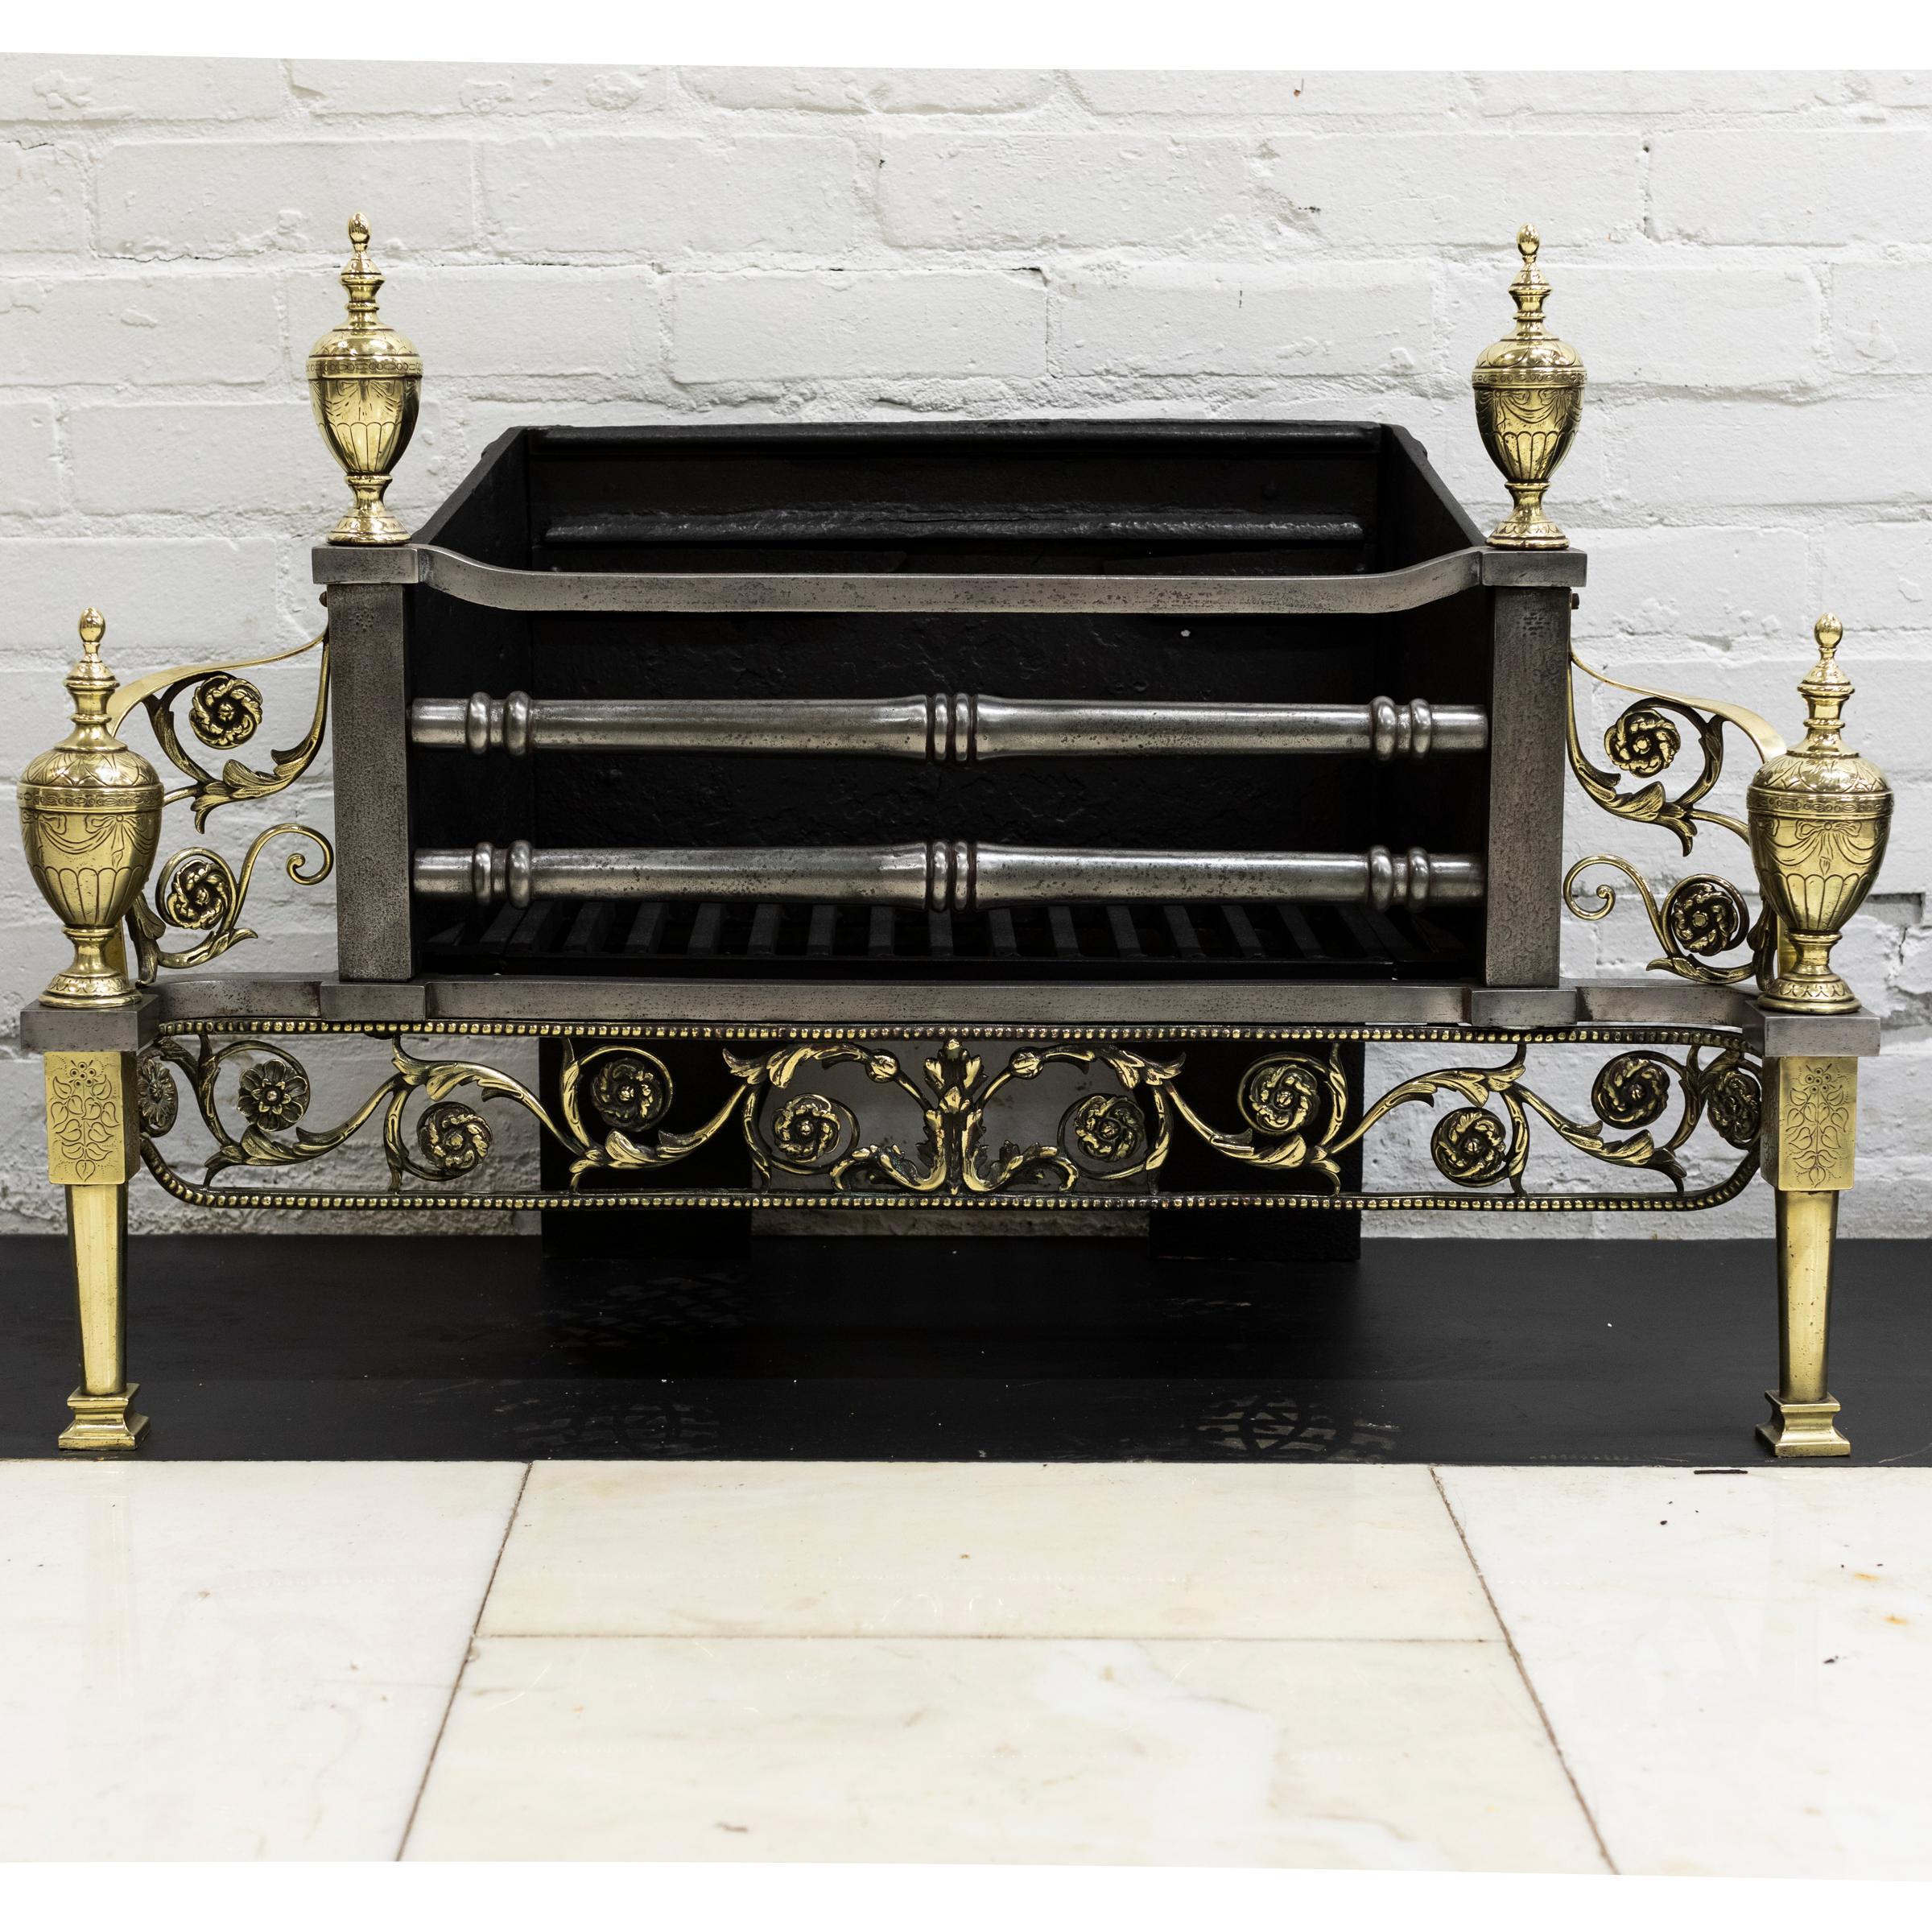 A remarkable and fine piece, this antique Victorian reclaimed fire basket is flanked by intricately detailed griffins and ornate motifs throughout, demonstrating the flamboyance of the Rococo style.

The basket comes complete with an integral cast